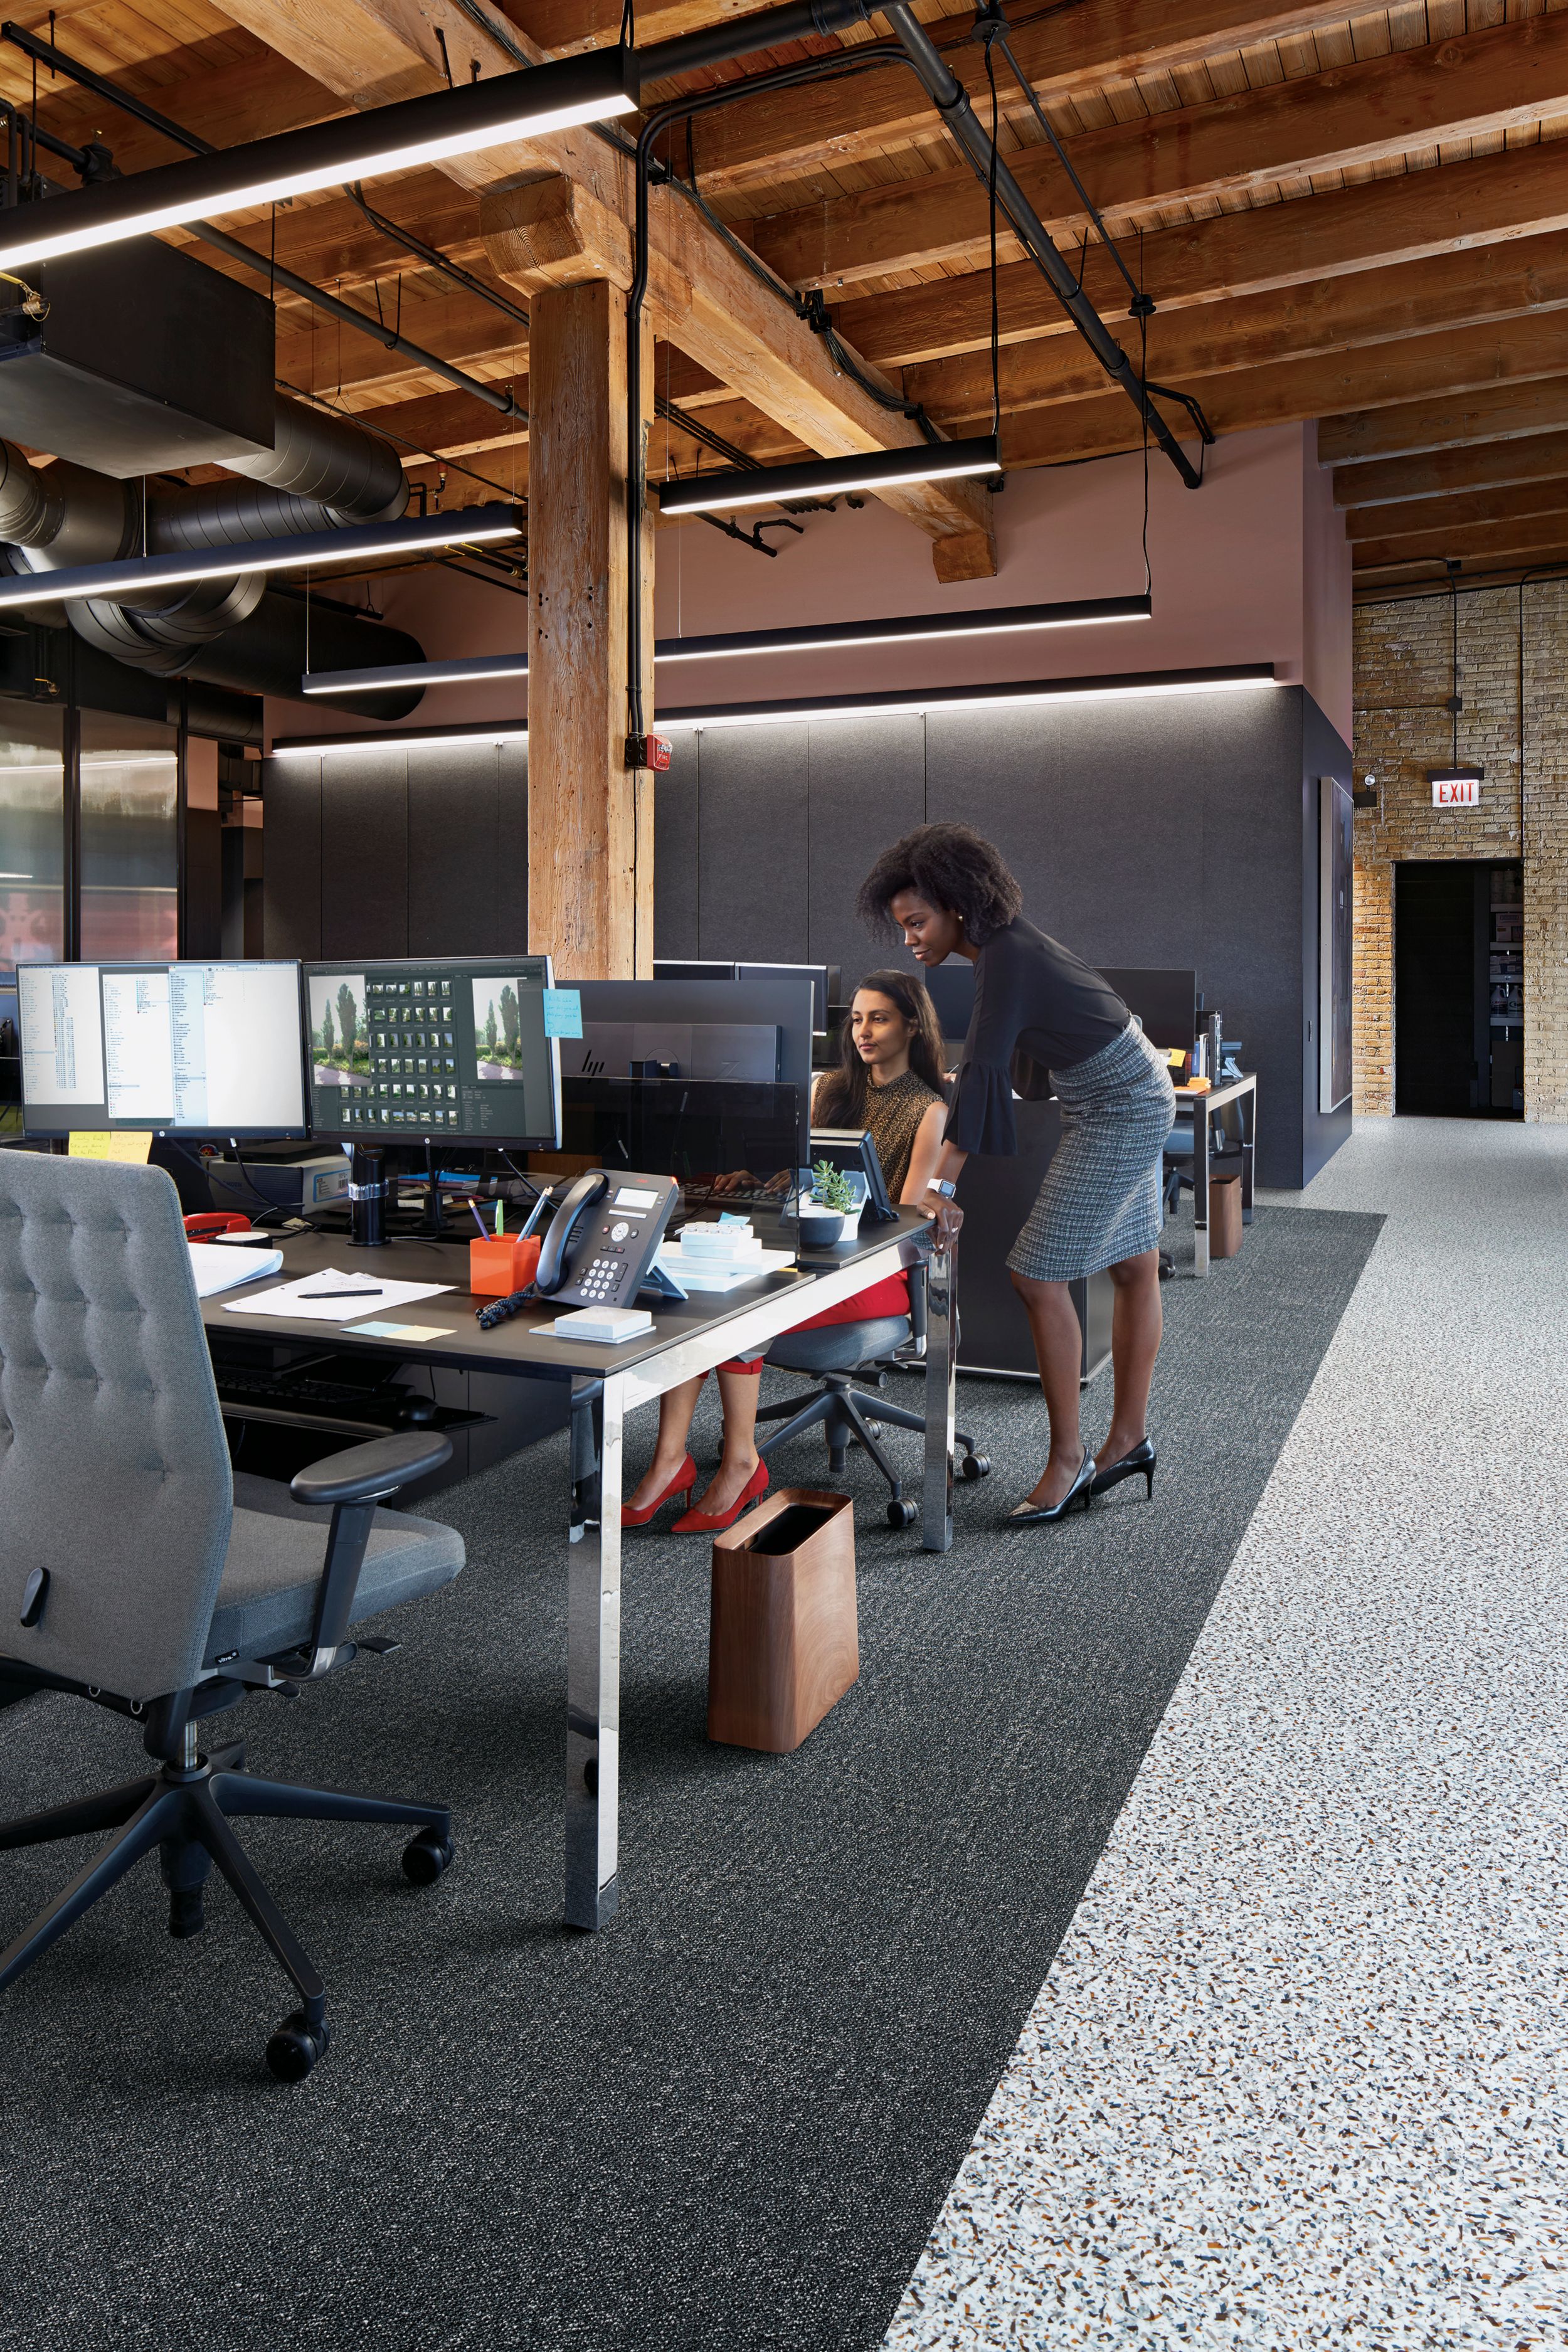 Interface Step it Up and Walk on By carpet tile in common work space with two people image number 4